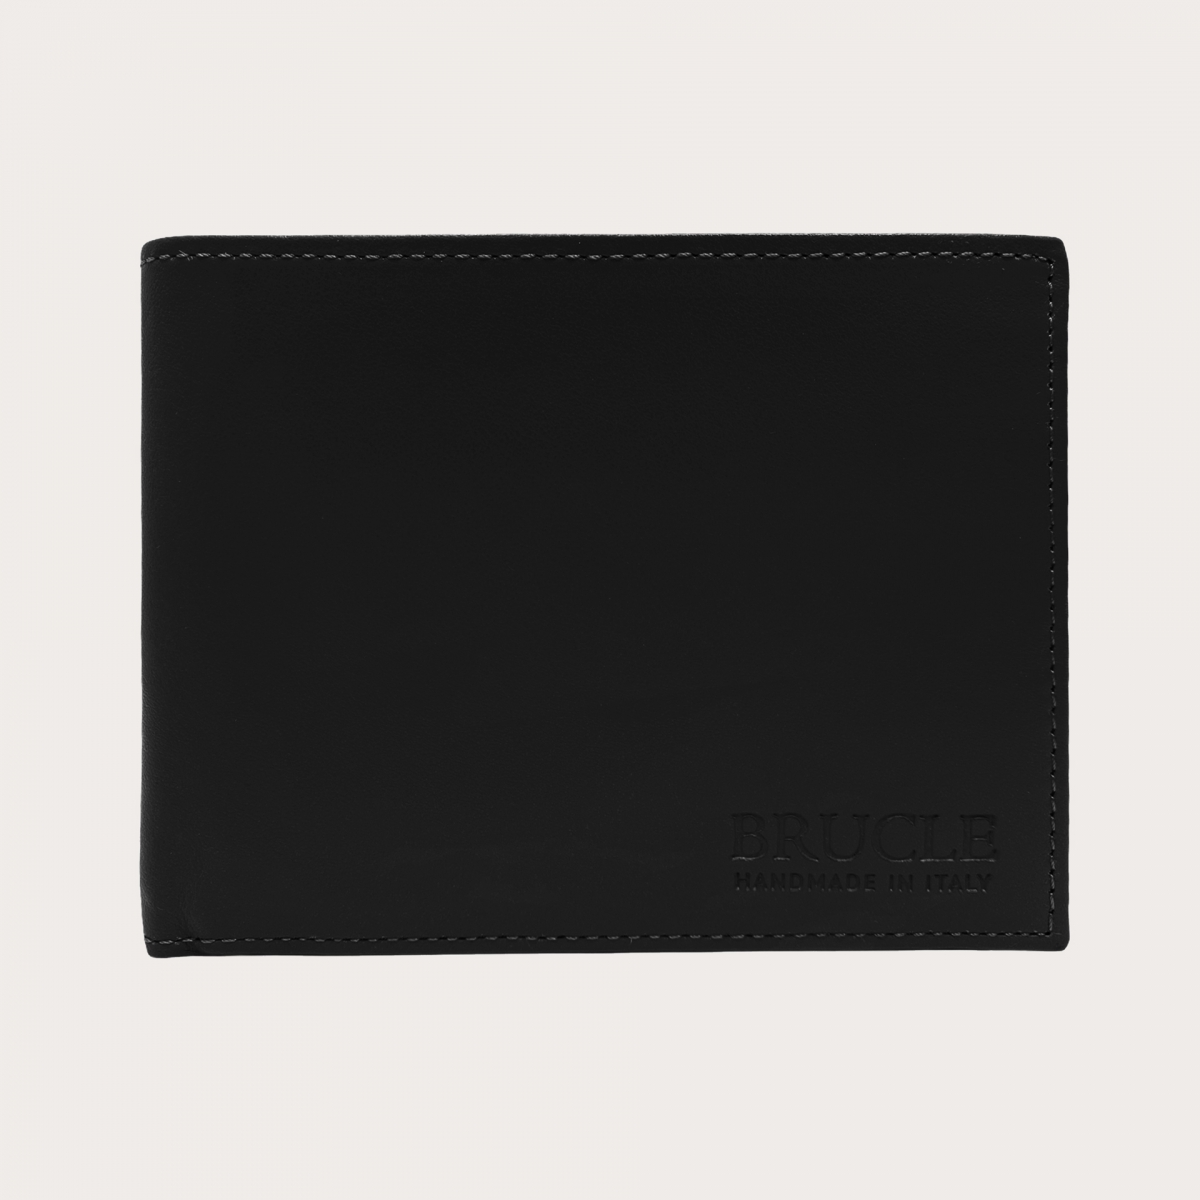 Brucle Men's bifold leather wallet with flap, black